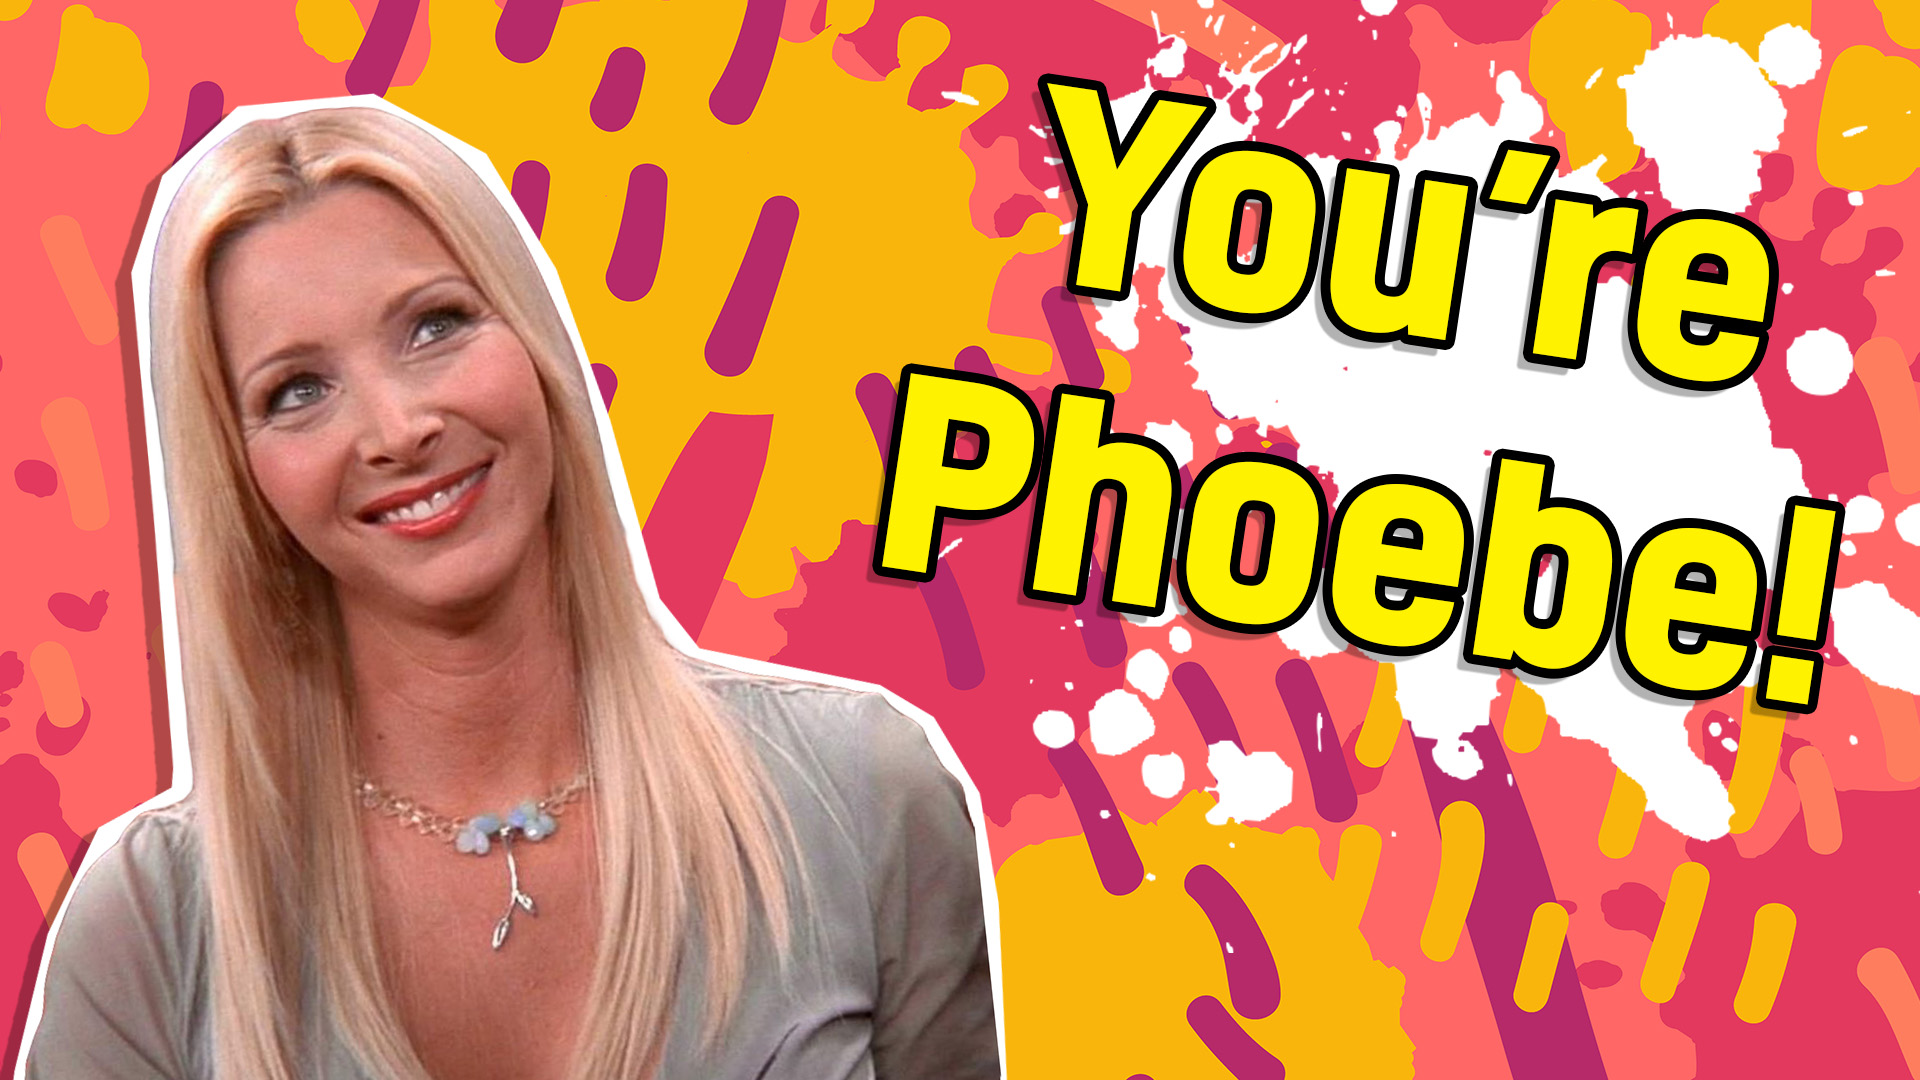 Your favourite is Phoebe!